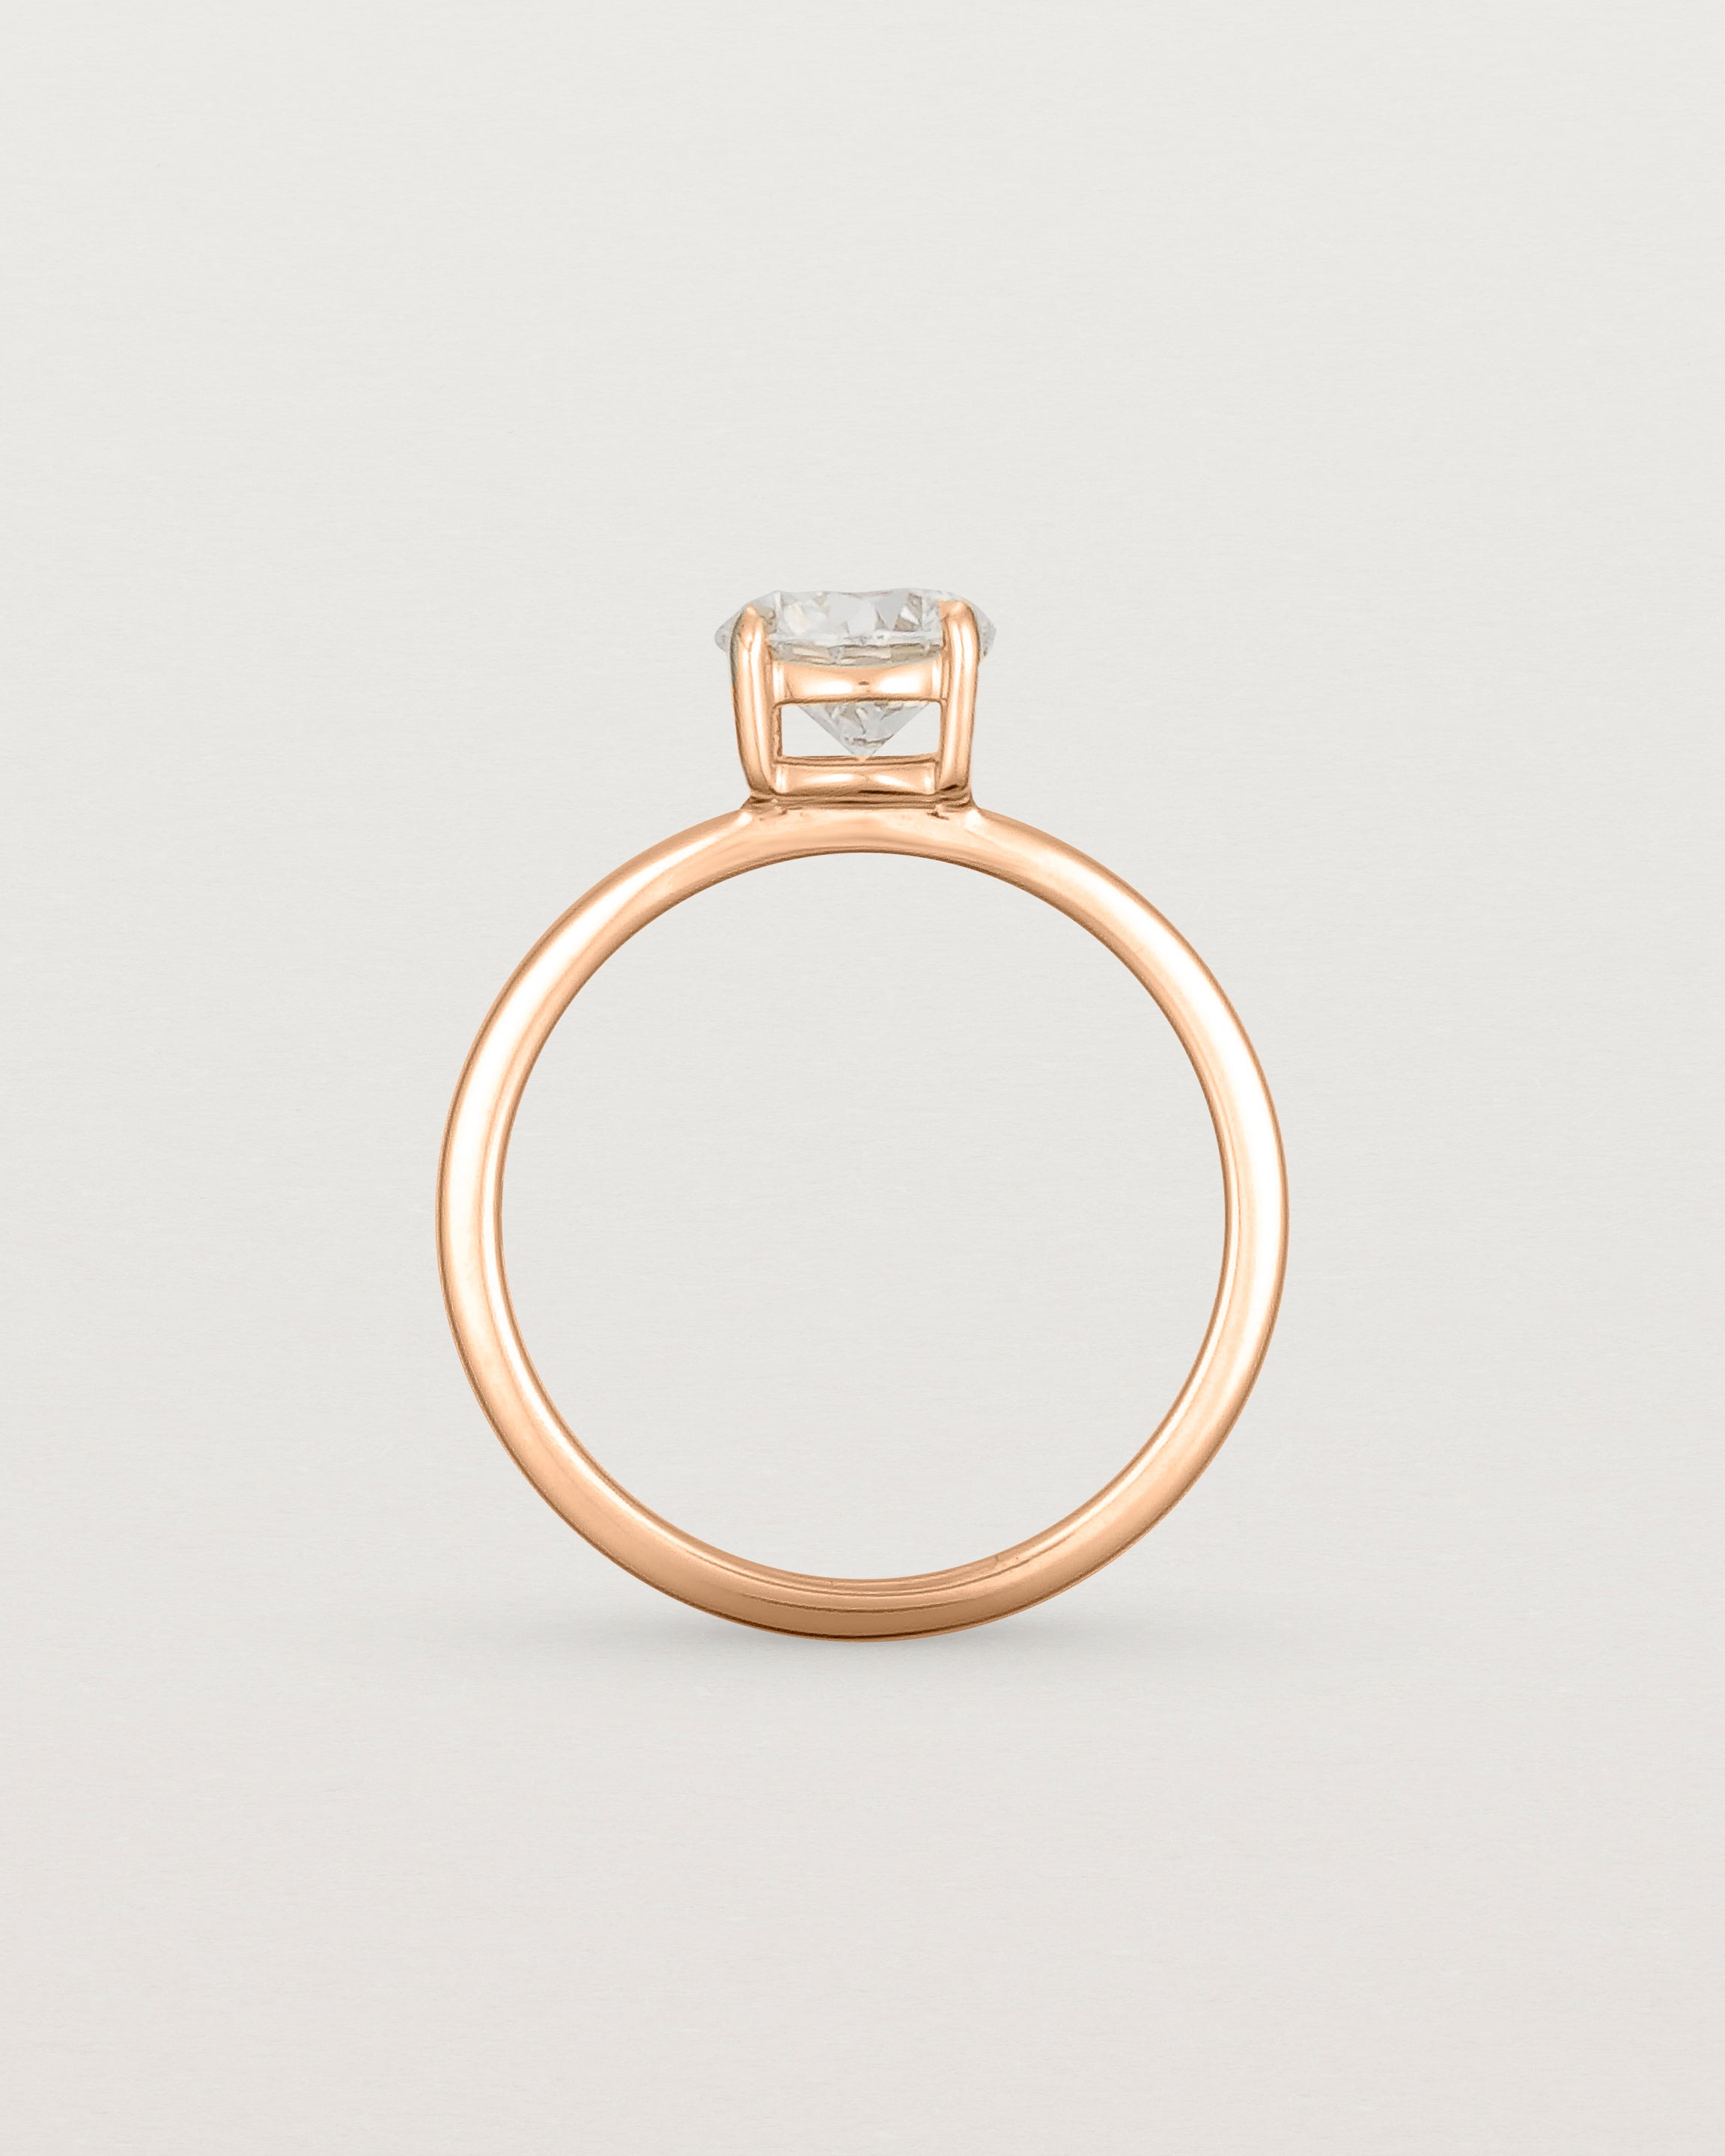 Standing view of the Petite Una Round Solitaire | Laboratory Grown Diamond | Rose Gold.